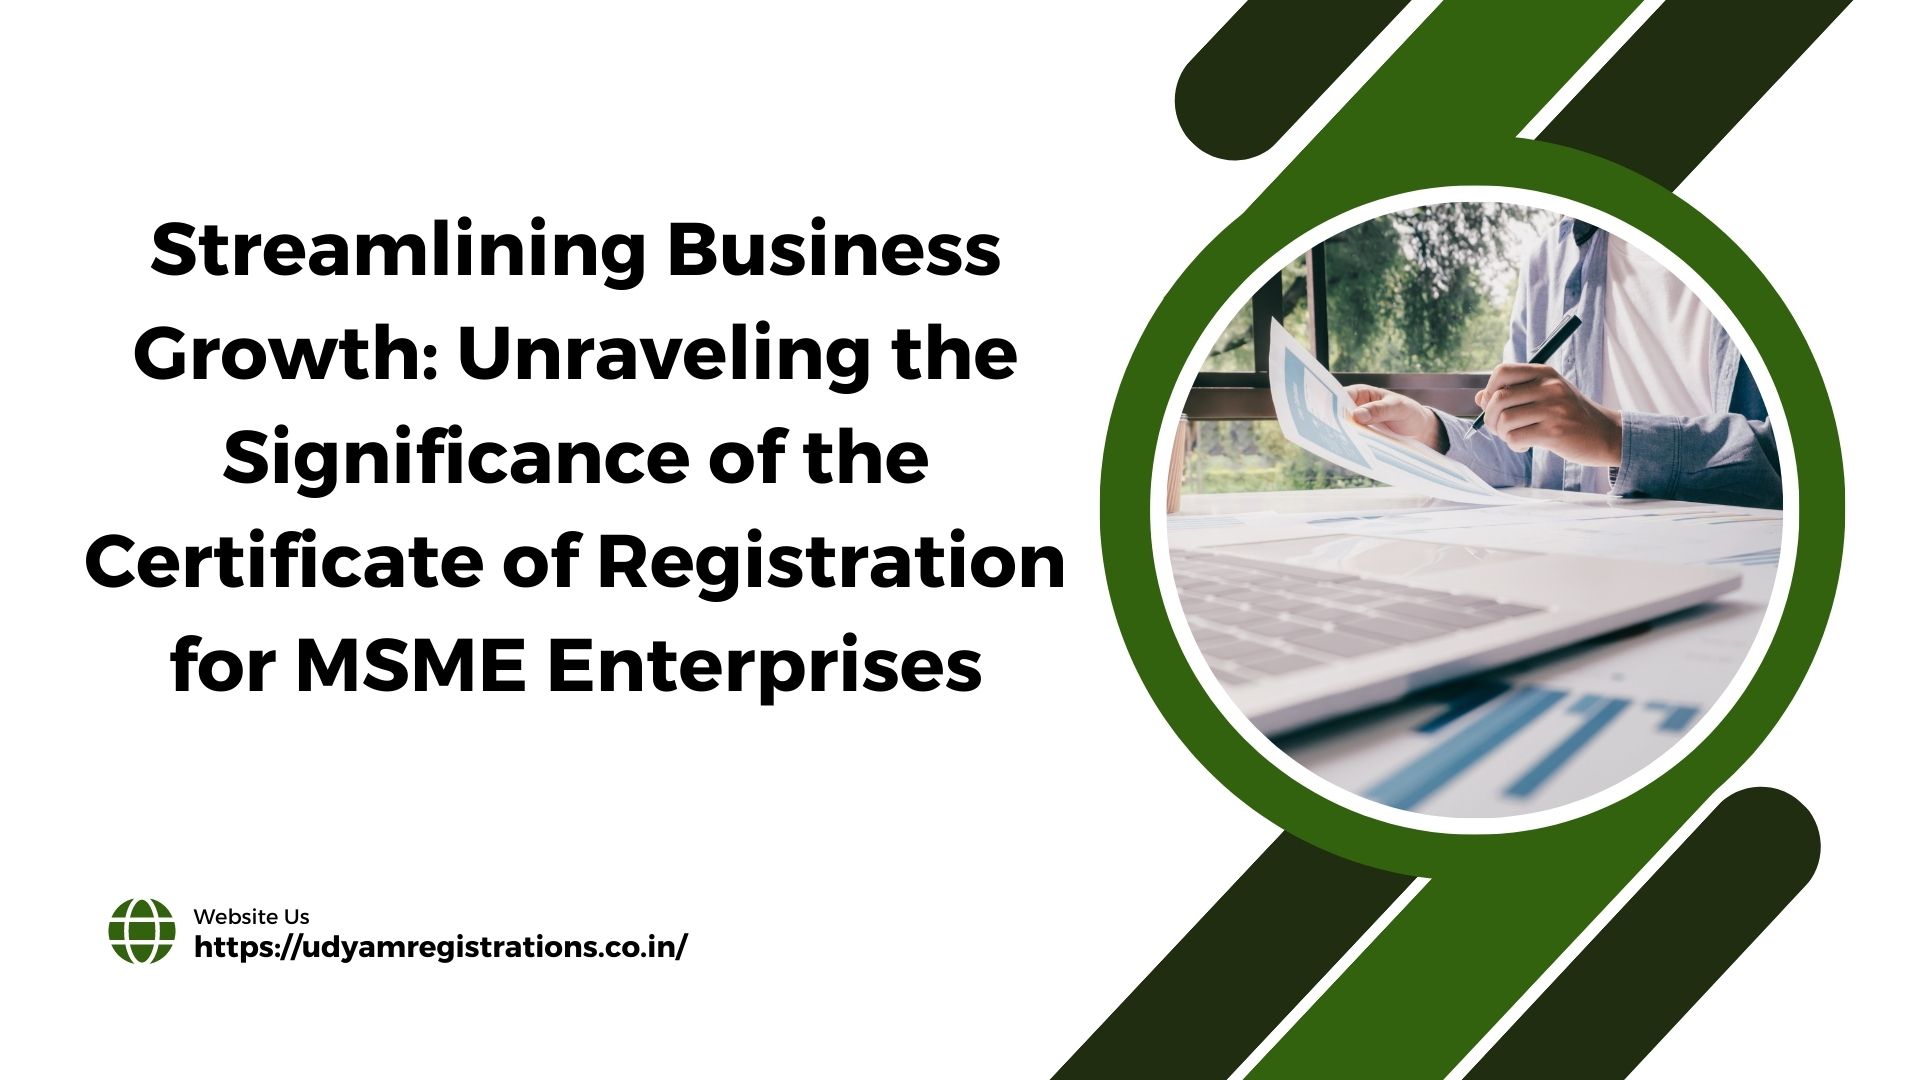 Streamlining Business Growth: Unraveling the Significance of the Certificate of Registration for MSME Enterprises